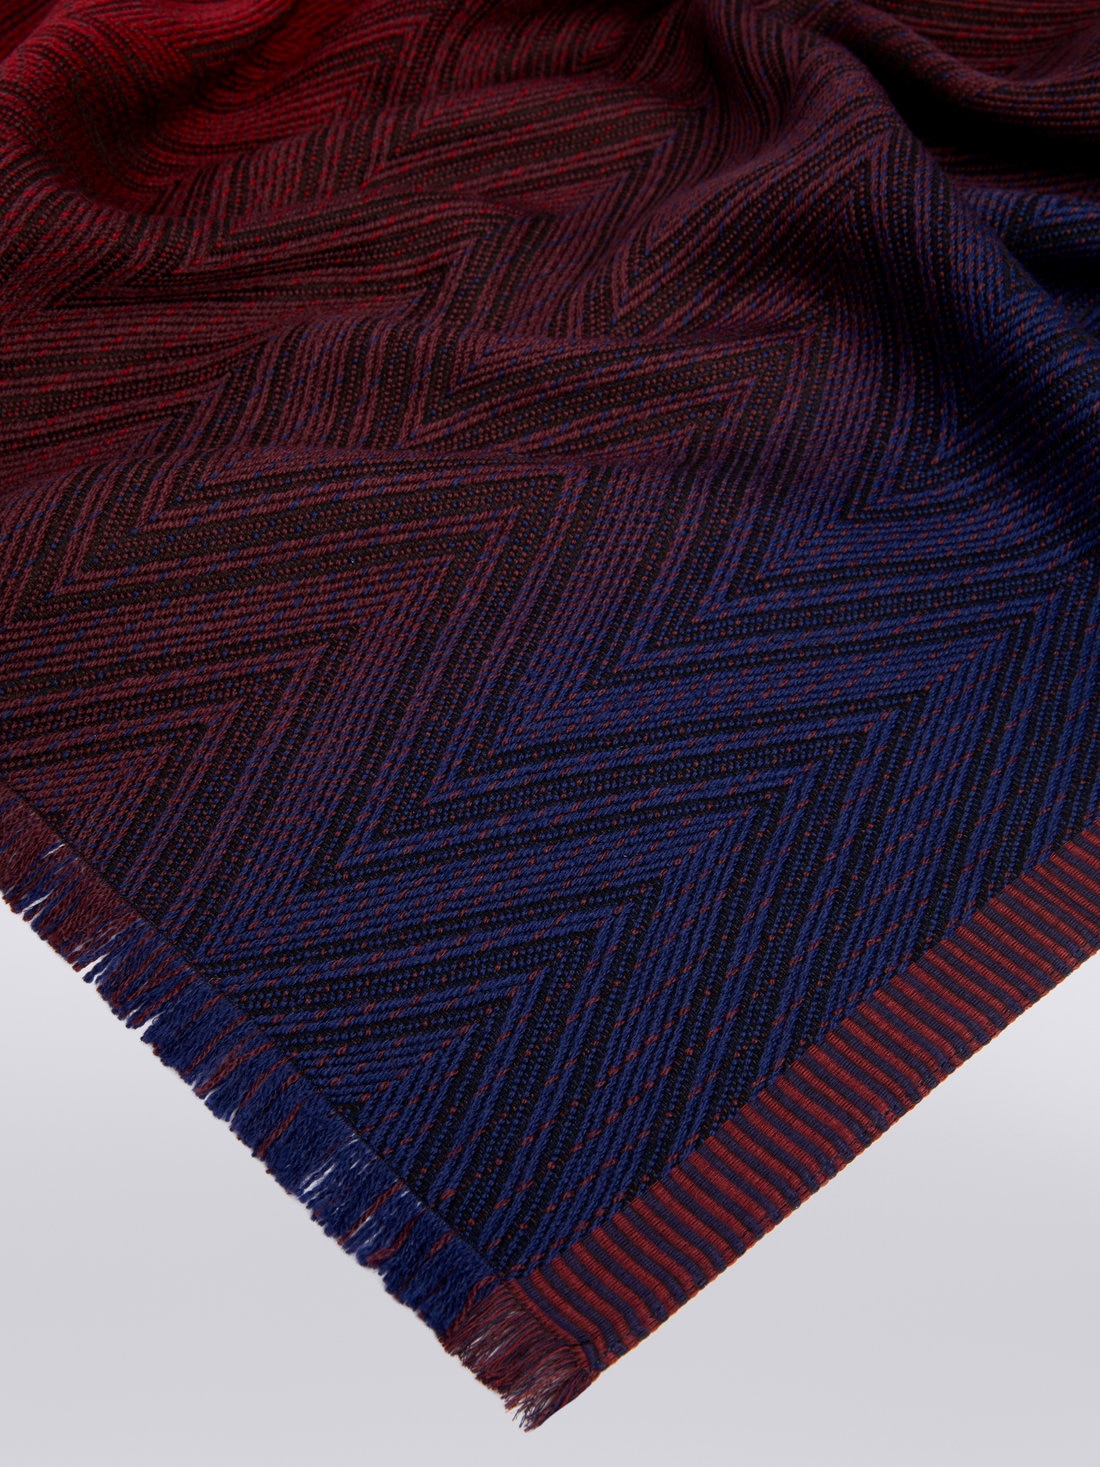 Viscose and wool chevron knit stole with frayed edges, Multicoloured  - 8053147023281 - 1